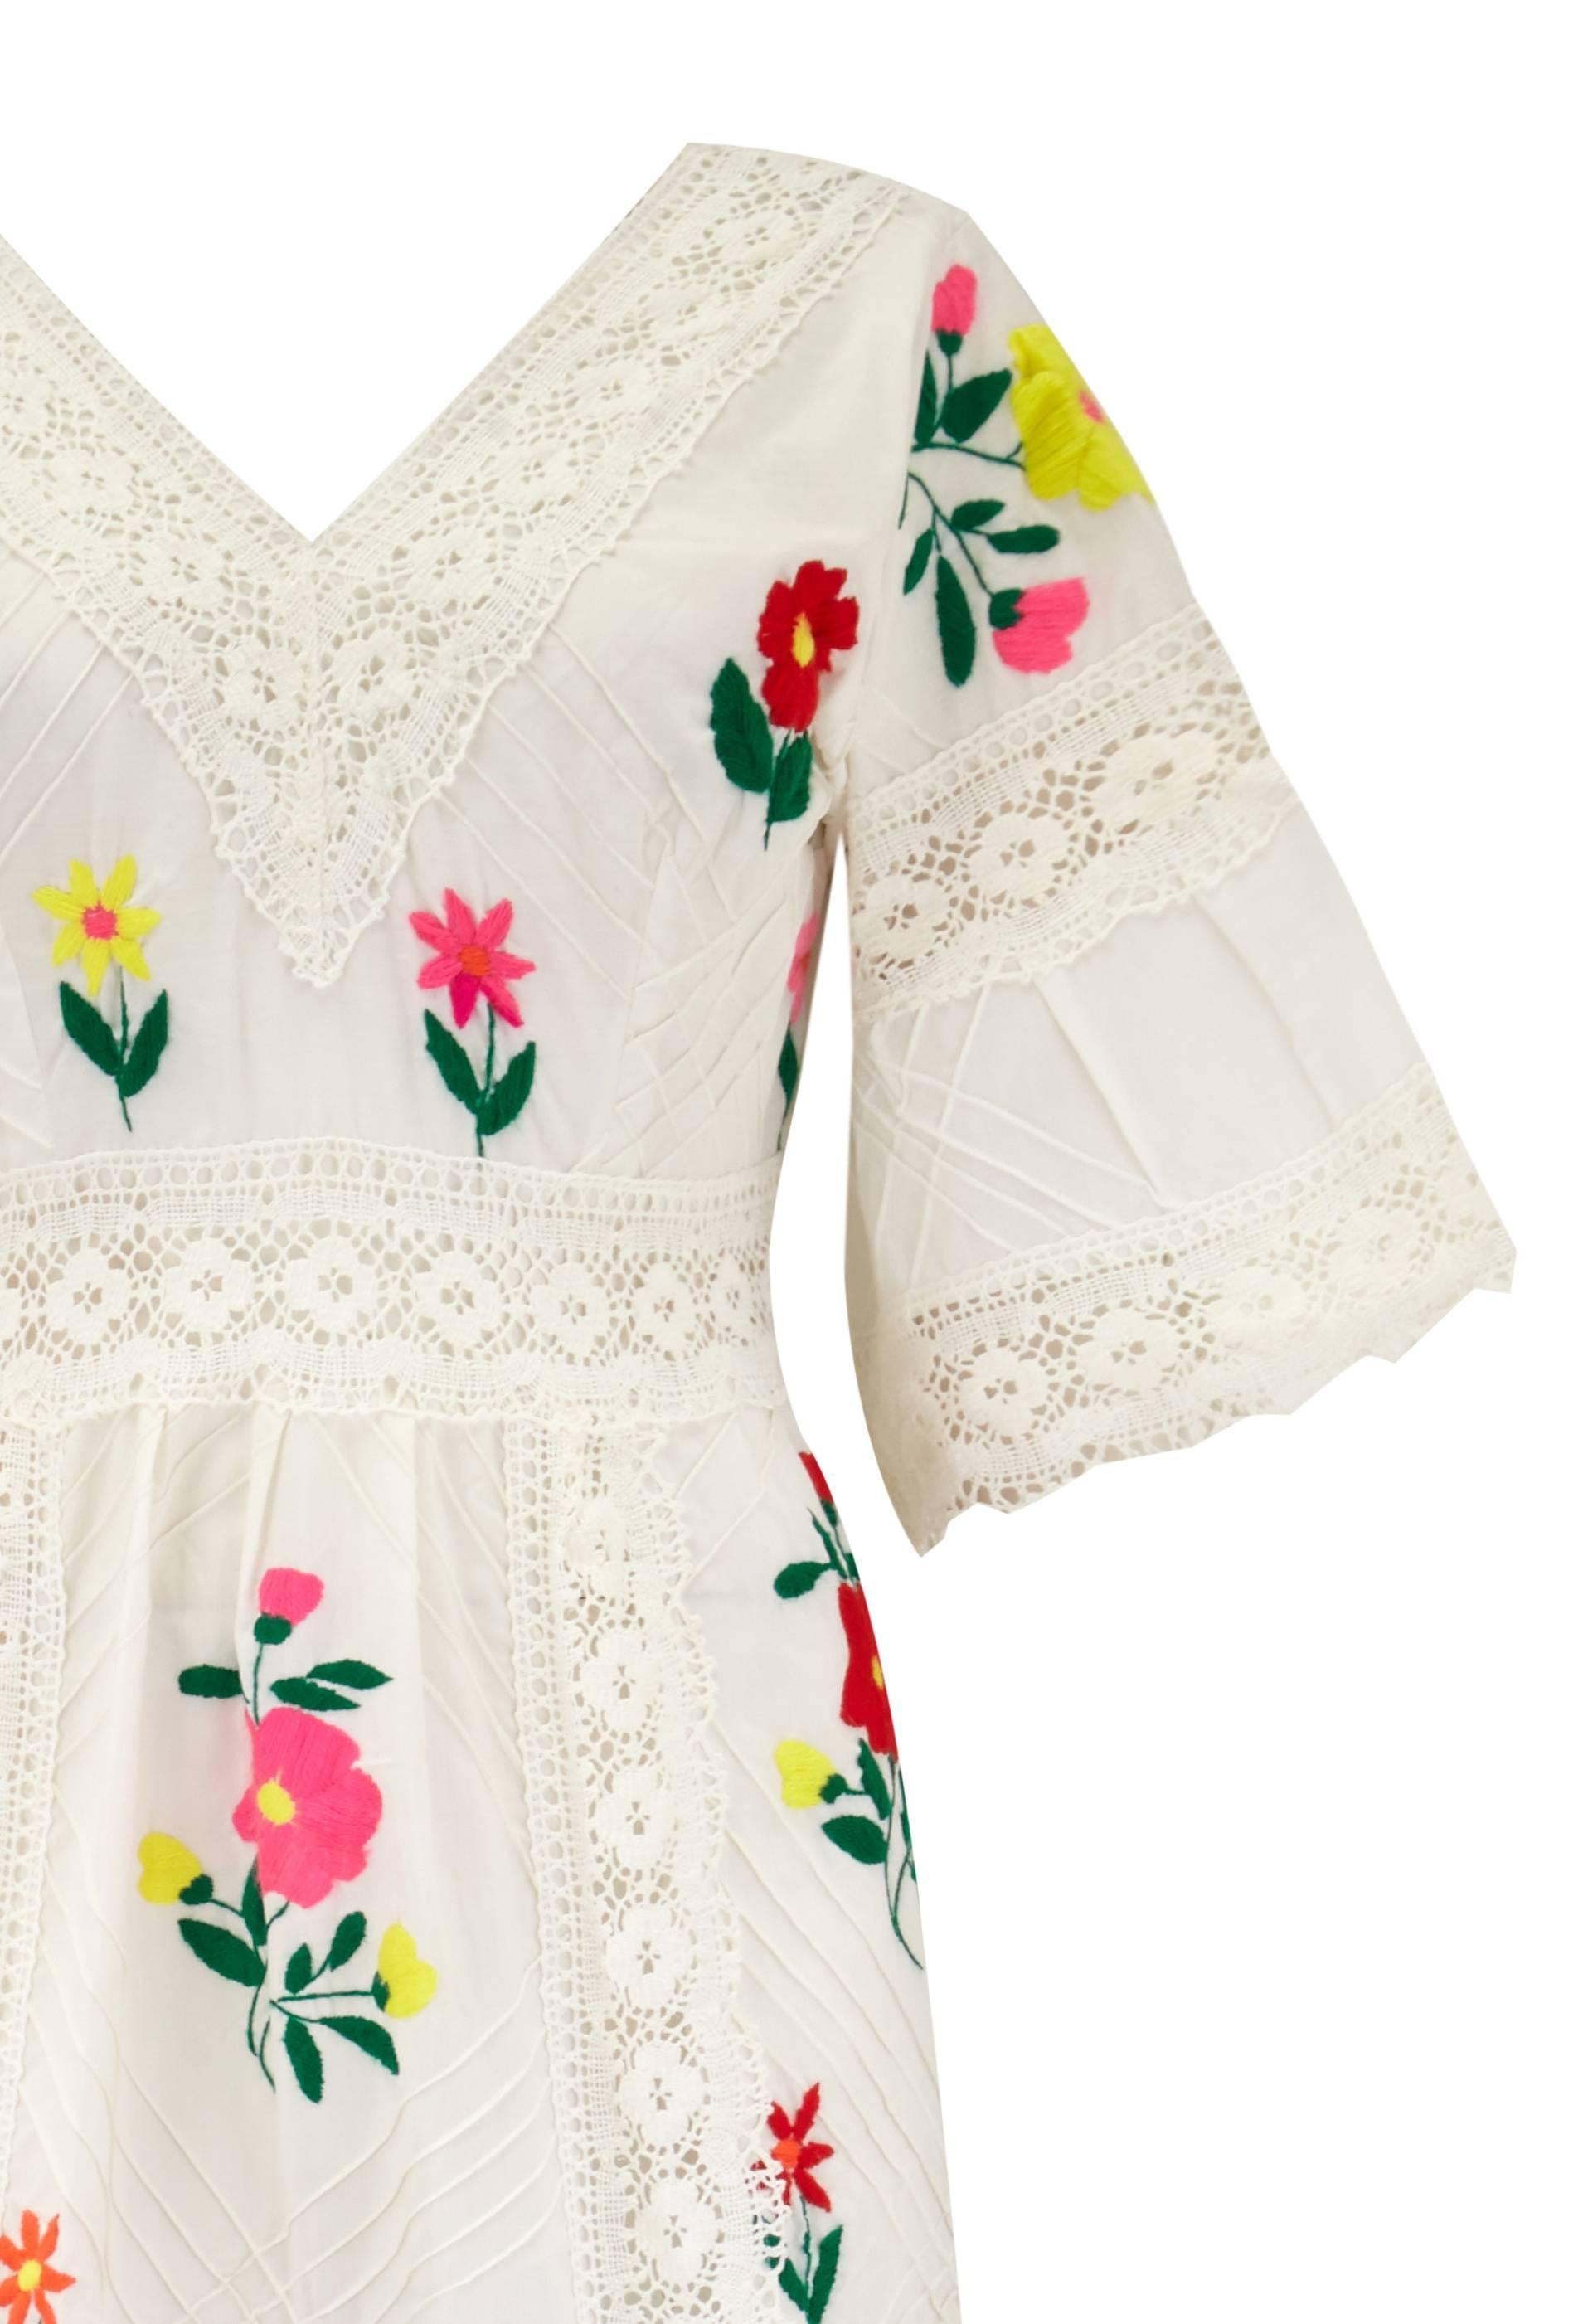 vintage mexican dress